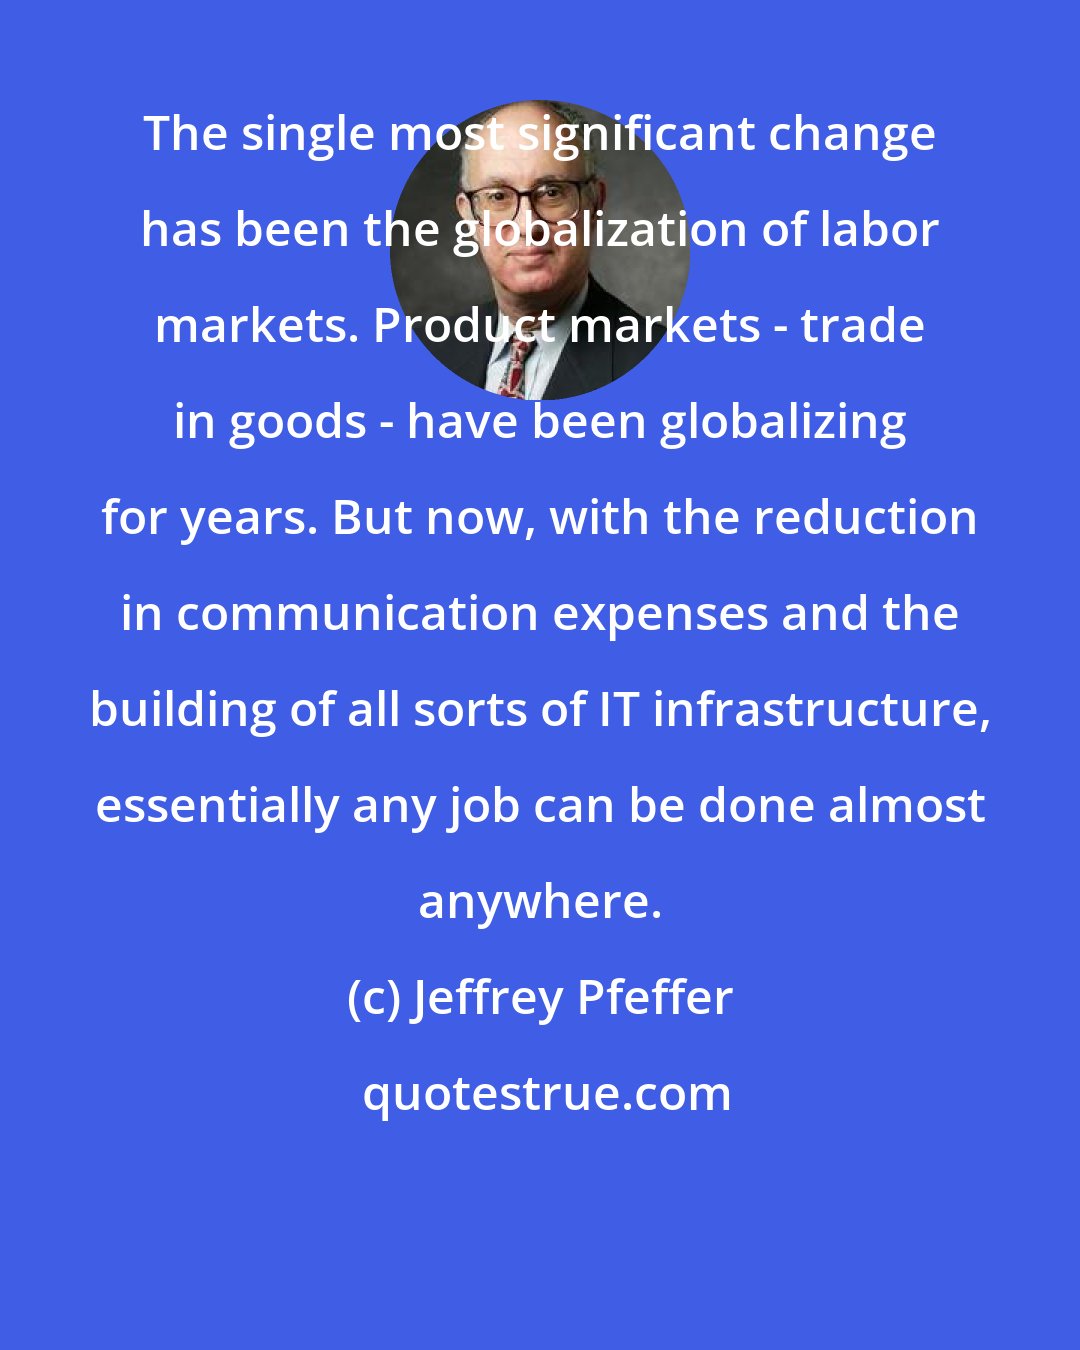 Jeffrey Pfeffer: The single most significant change has been the globalization of labor markets. Product markets - trade in goods - have been globalizing for years. But now, with the reduction in communication expenses and the building of all sorts of IT infrastructure, essentially any job can be done almost anywhere.